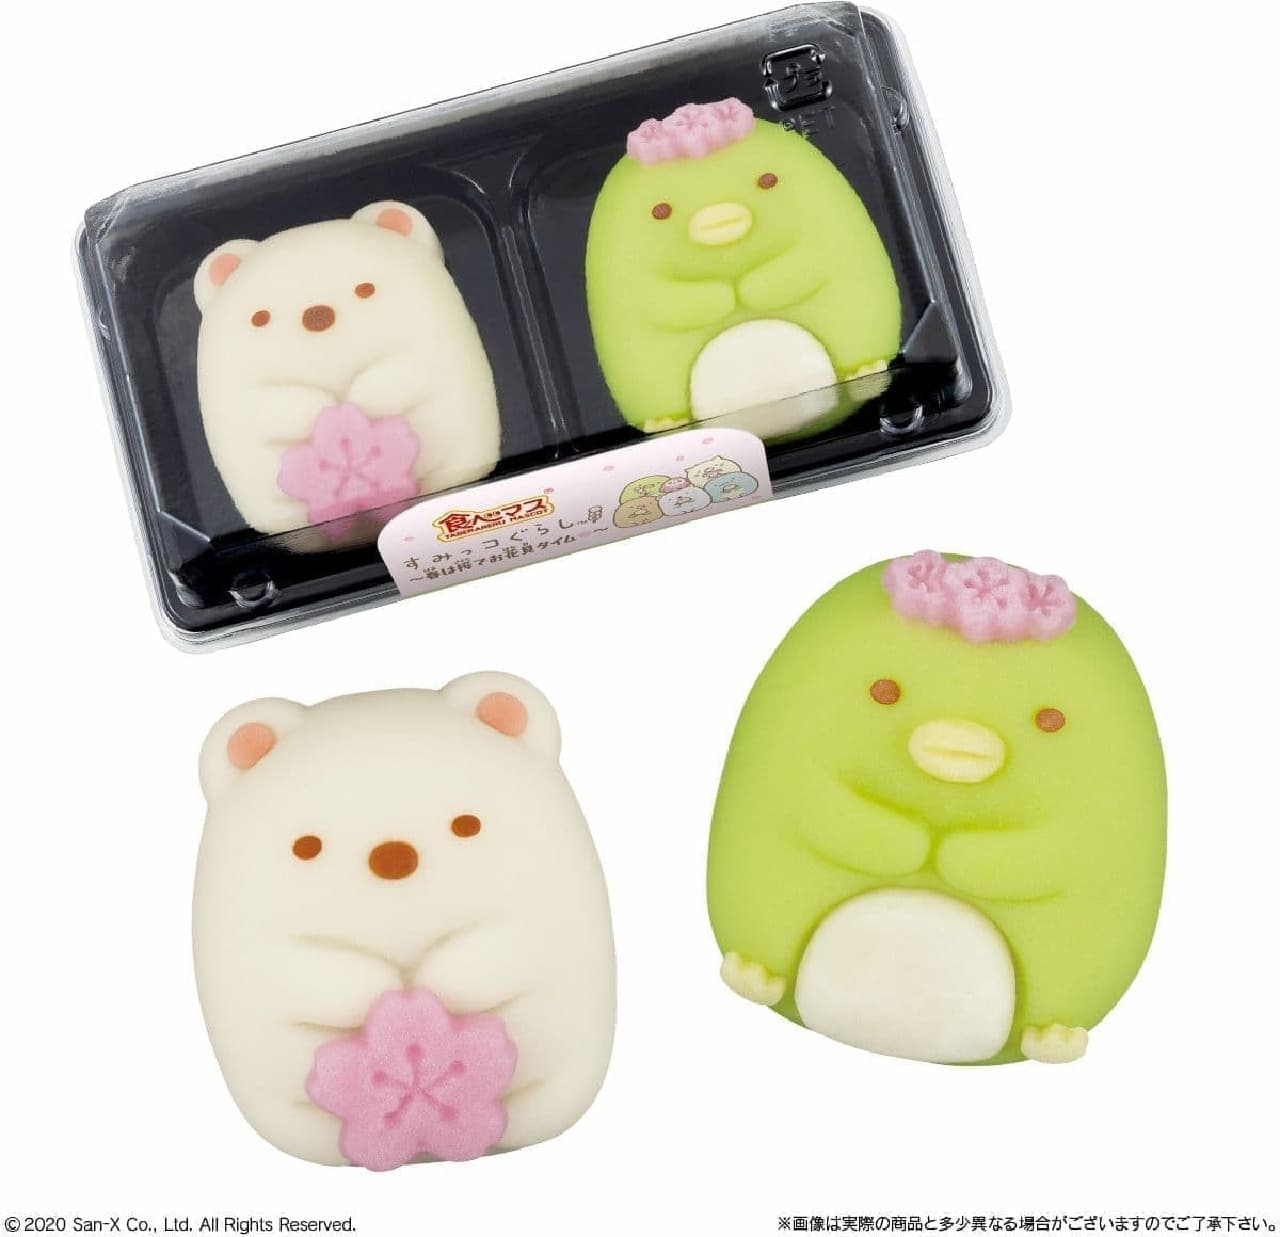 FamilyMart "Eat trout Sumikko Gurashi-Cherry blossom viewing time in spring-"